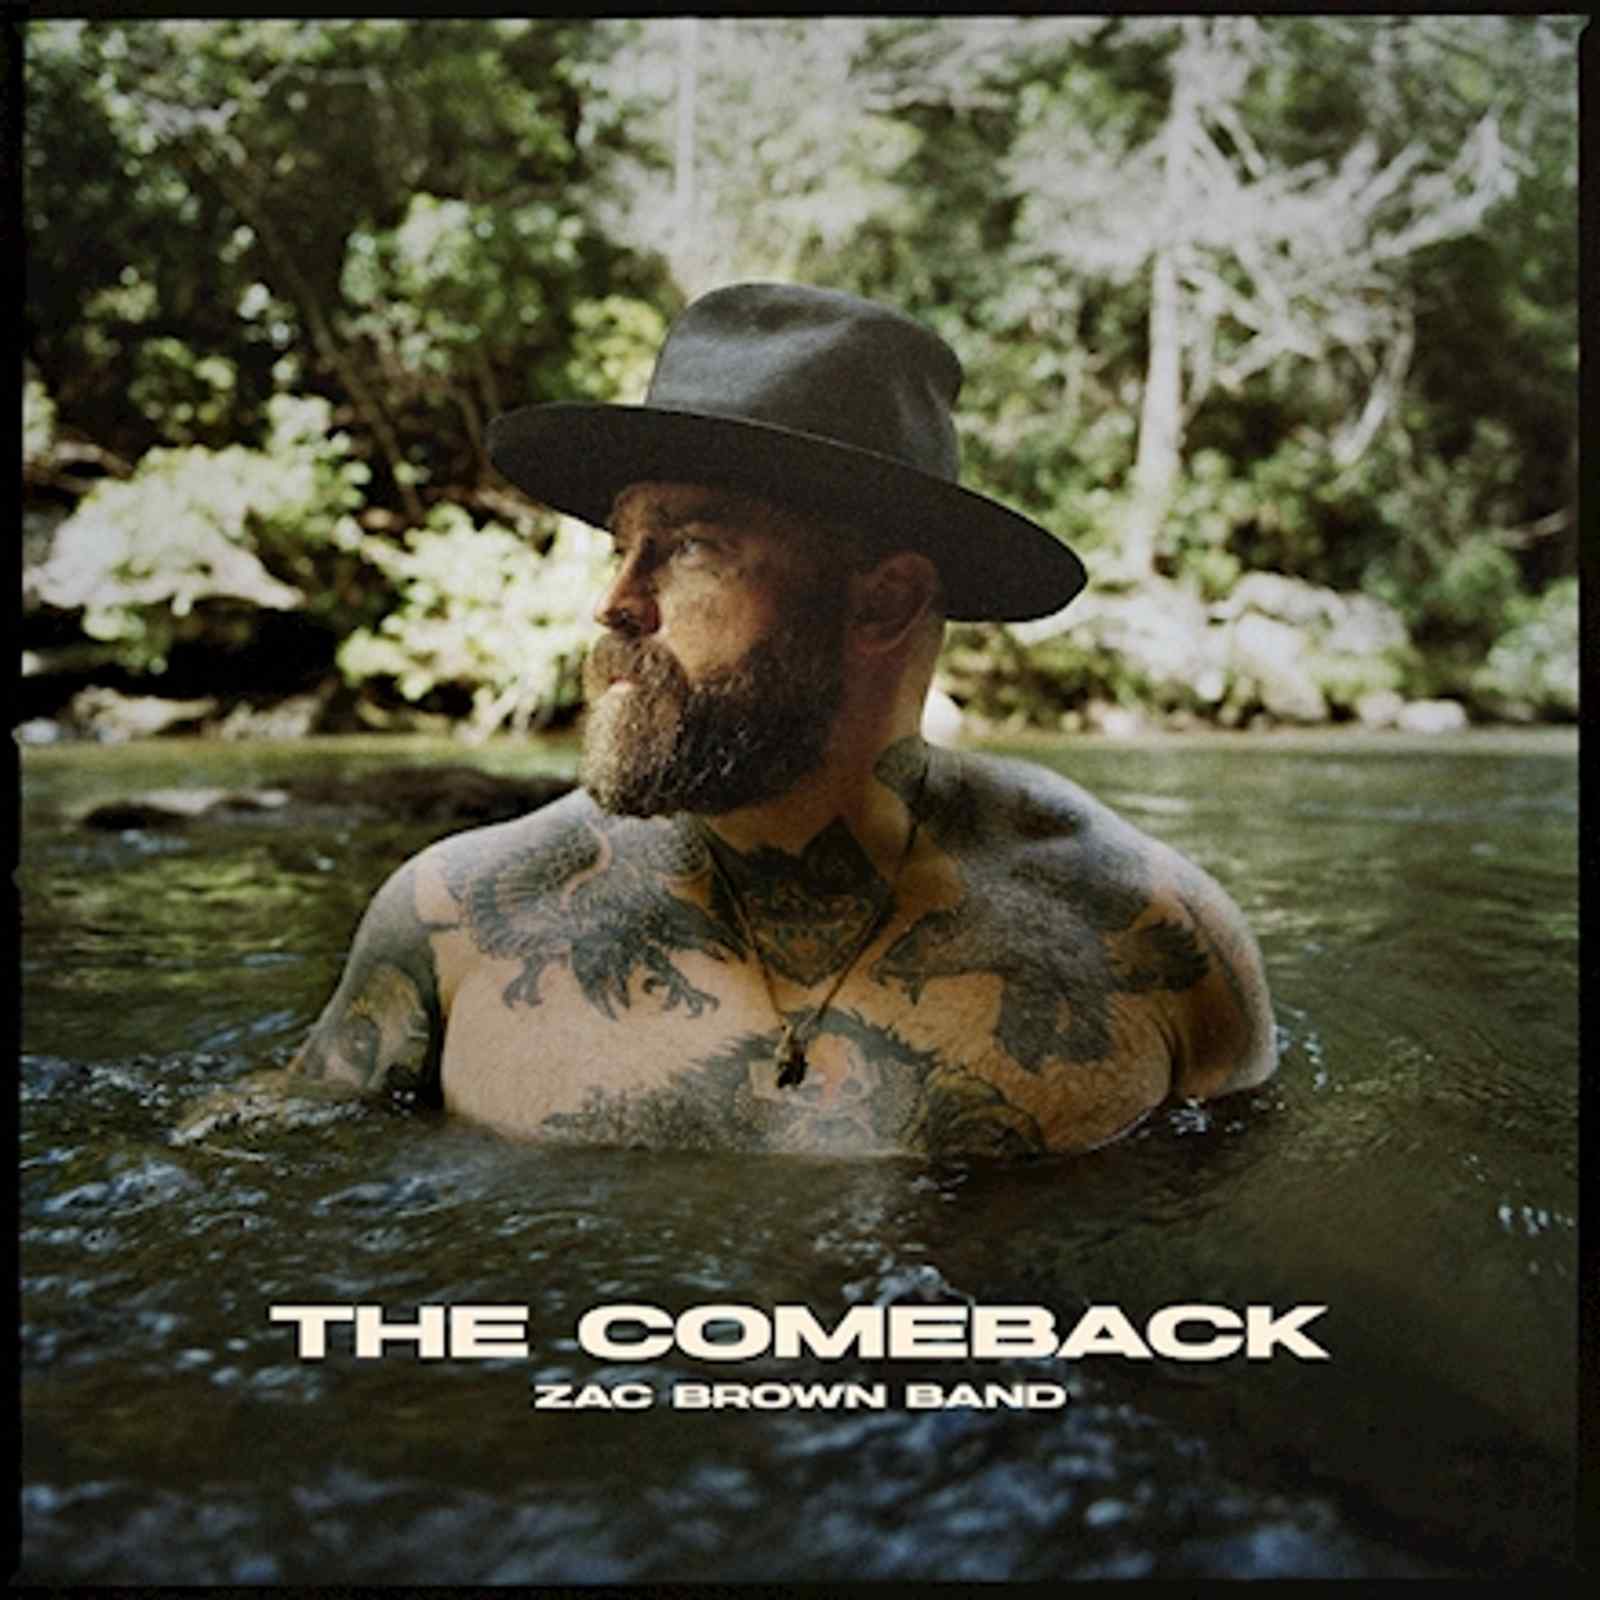 The Comeback by Zac Brown Band